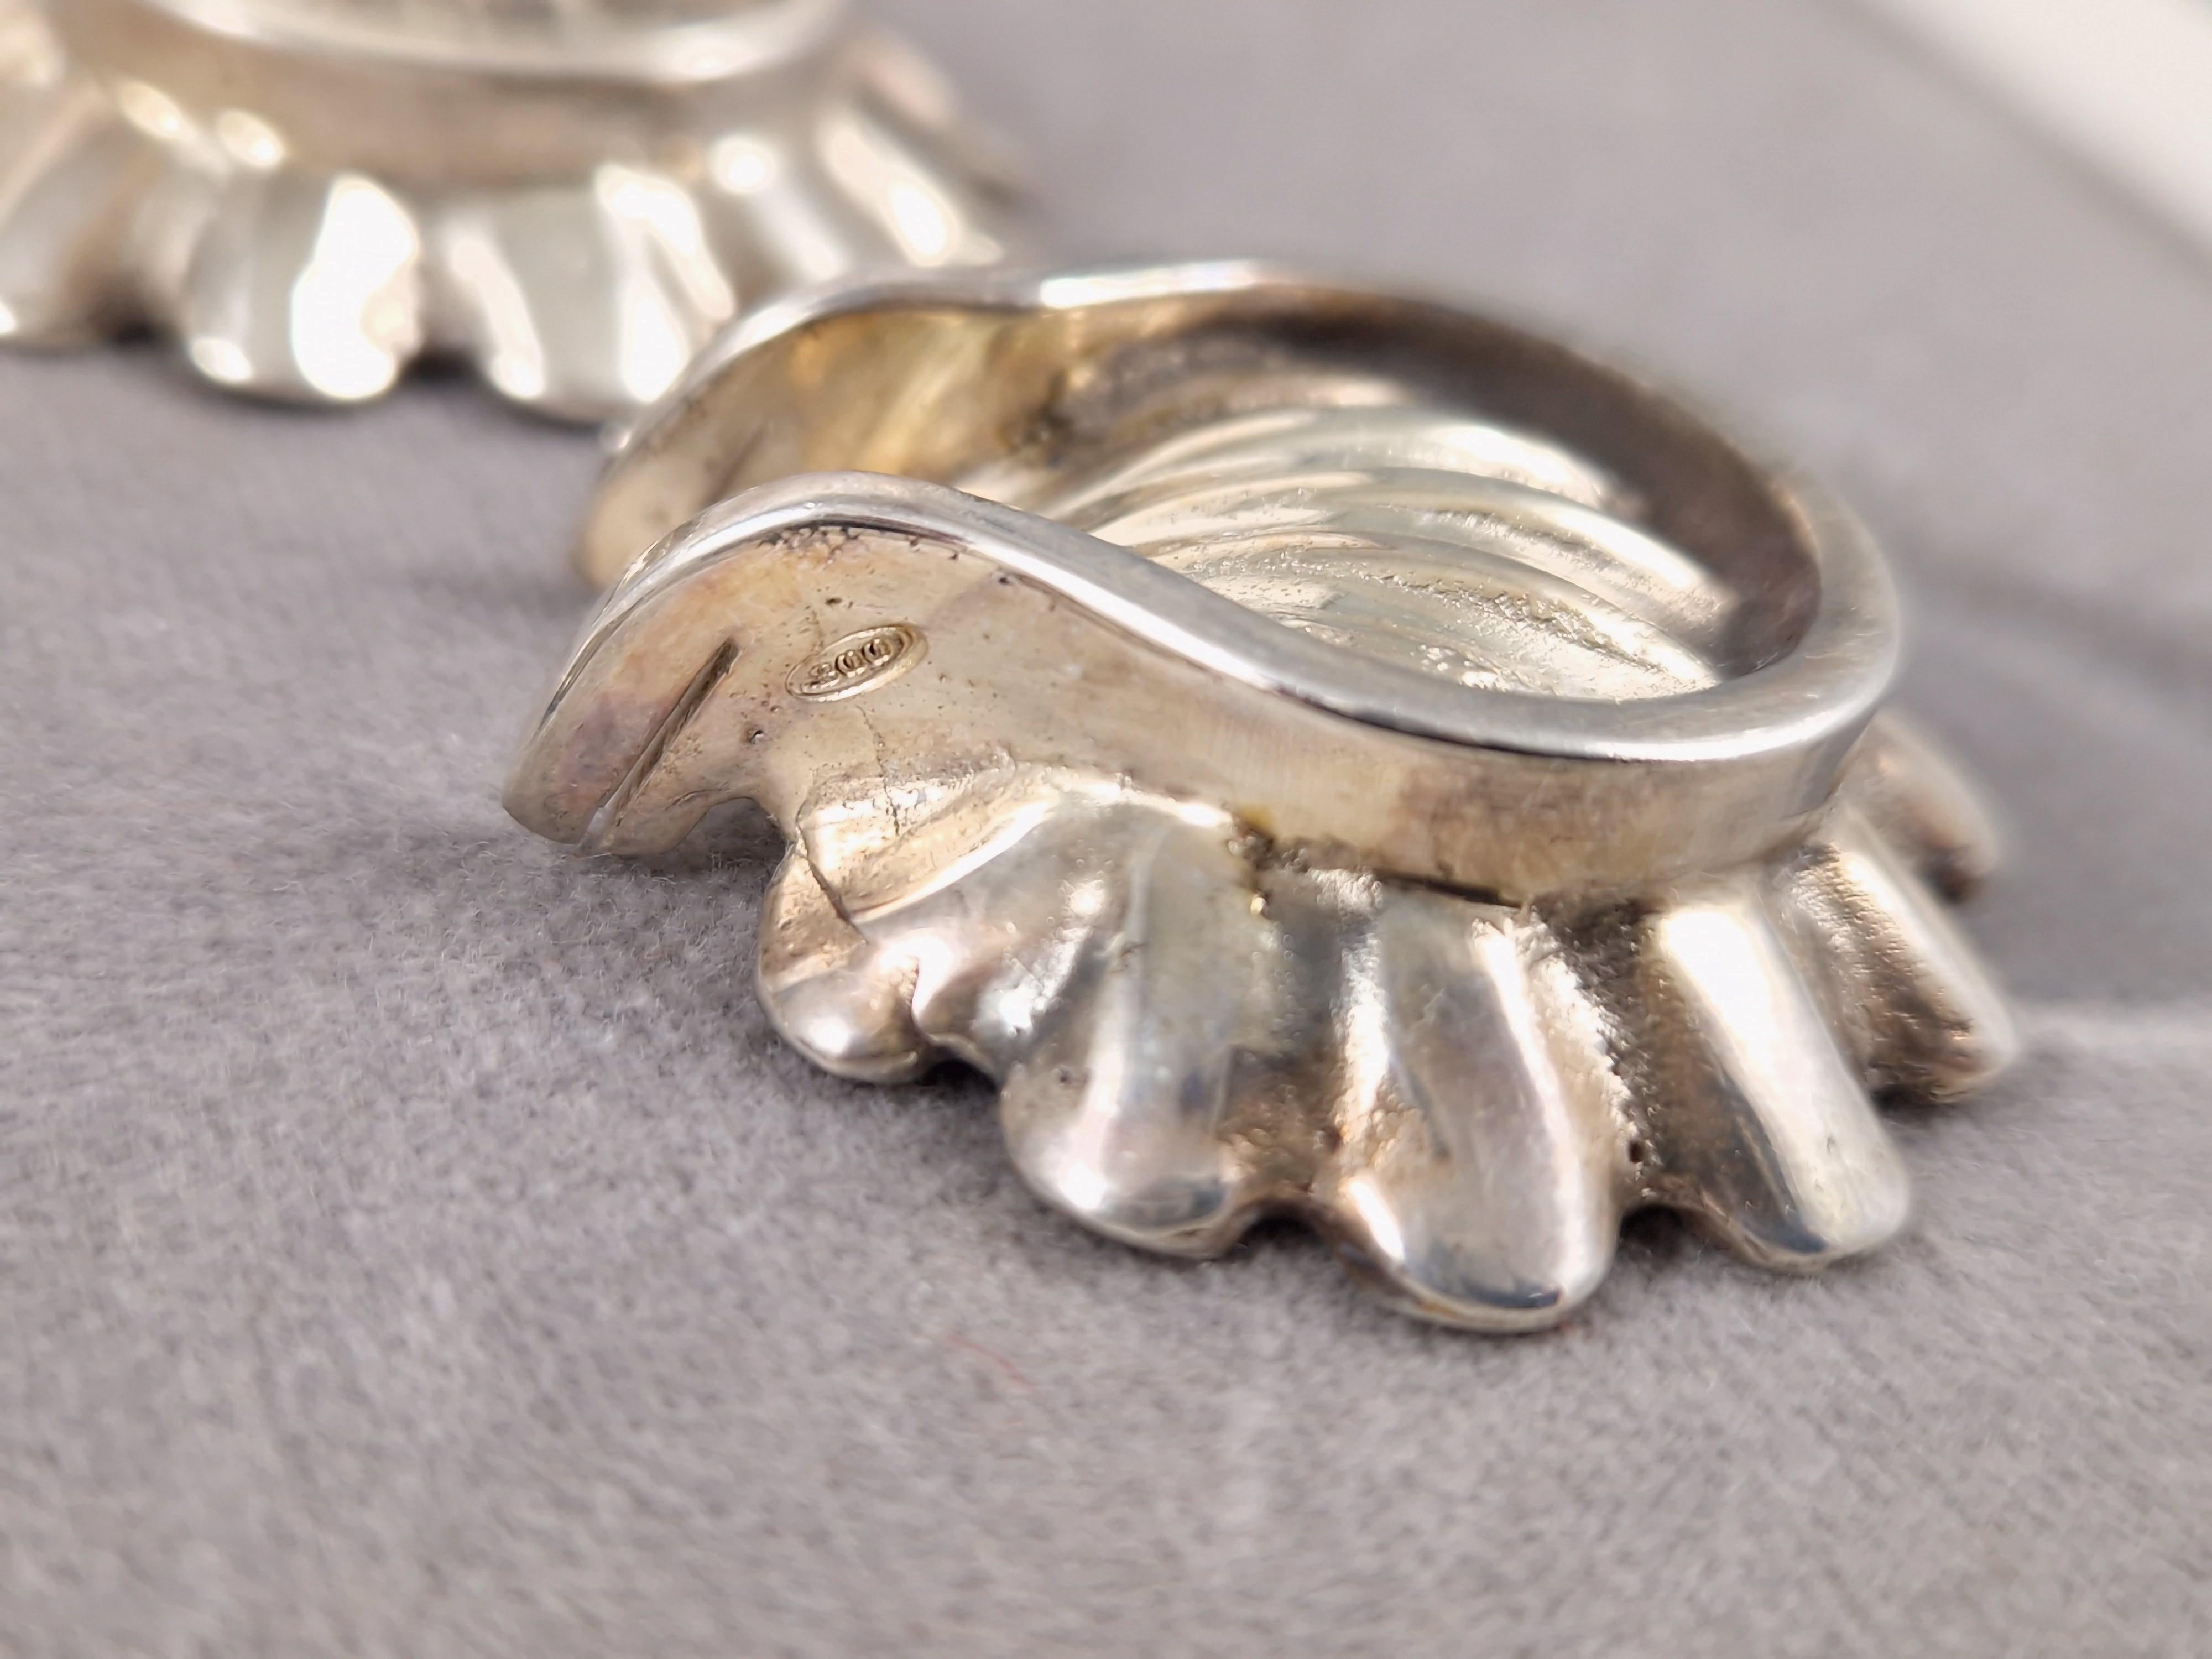 8 Place Card Holders / Salt Cellars in Solid Silver 1